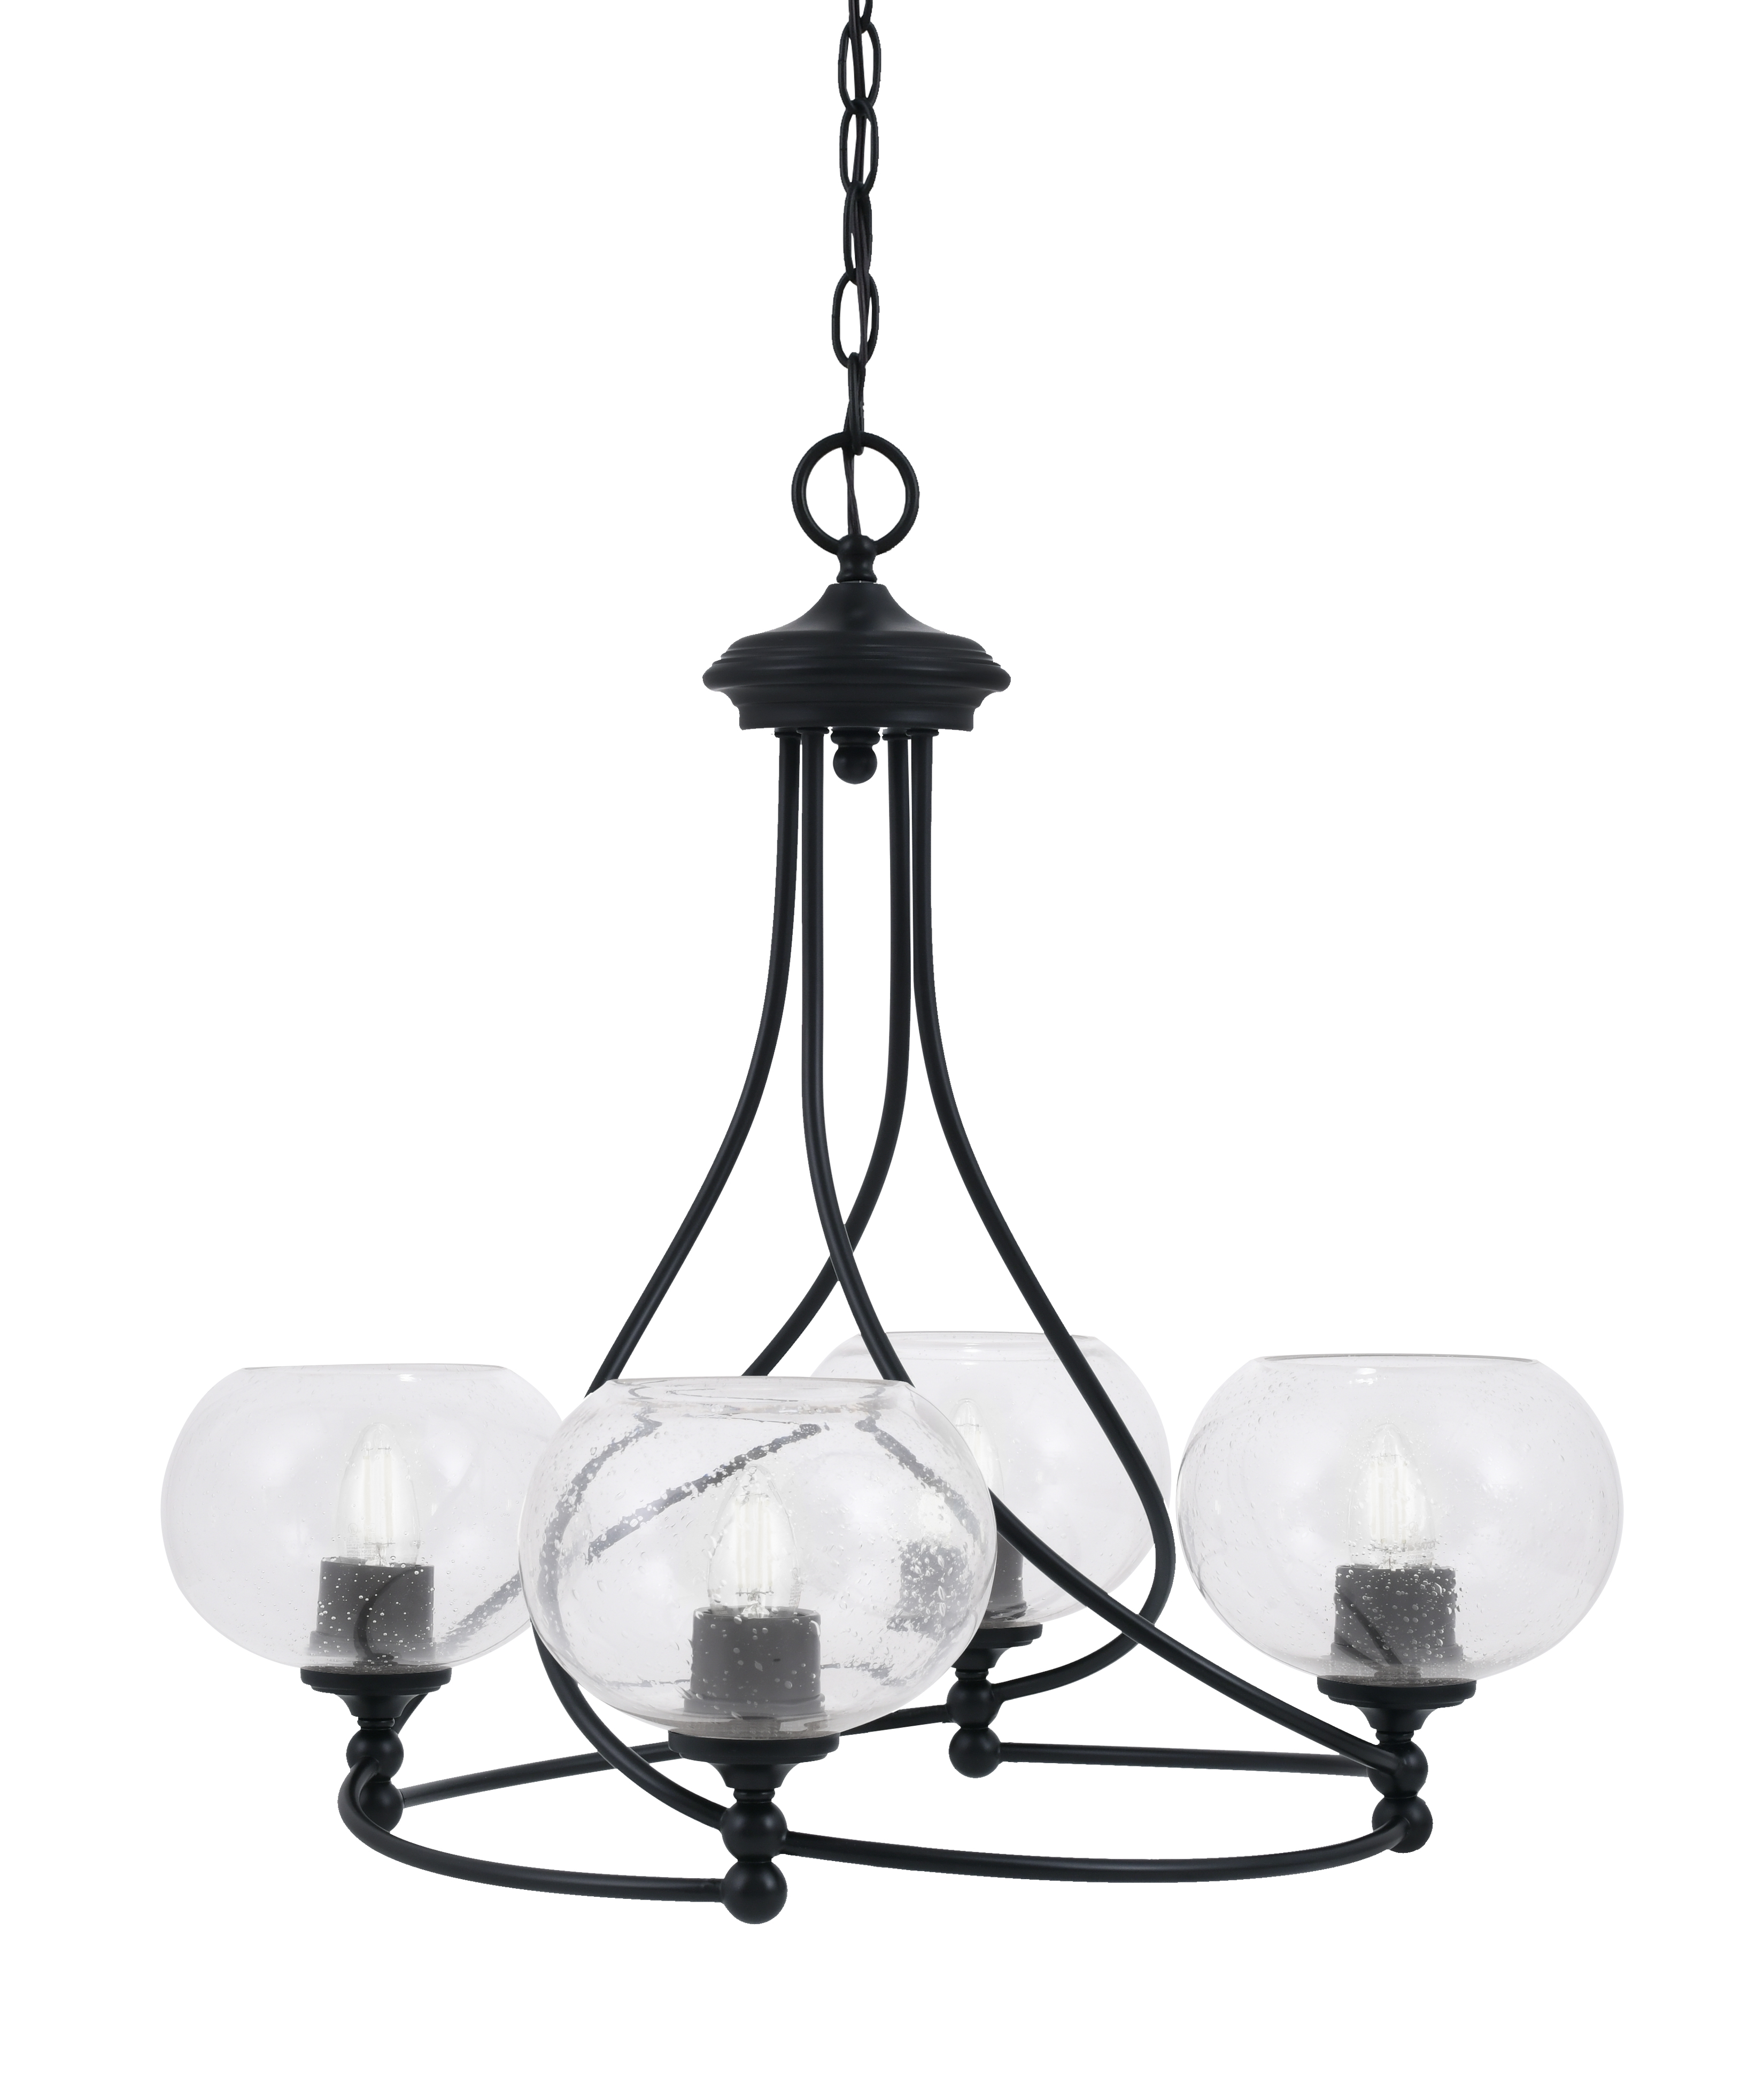 Toltec Lighting 904-MB-202 Capri Uplight, 4 Light, Chandelier Shown In Matte Black Finish With 7" Clear Bubble Glass